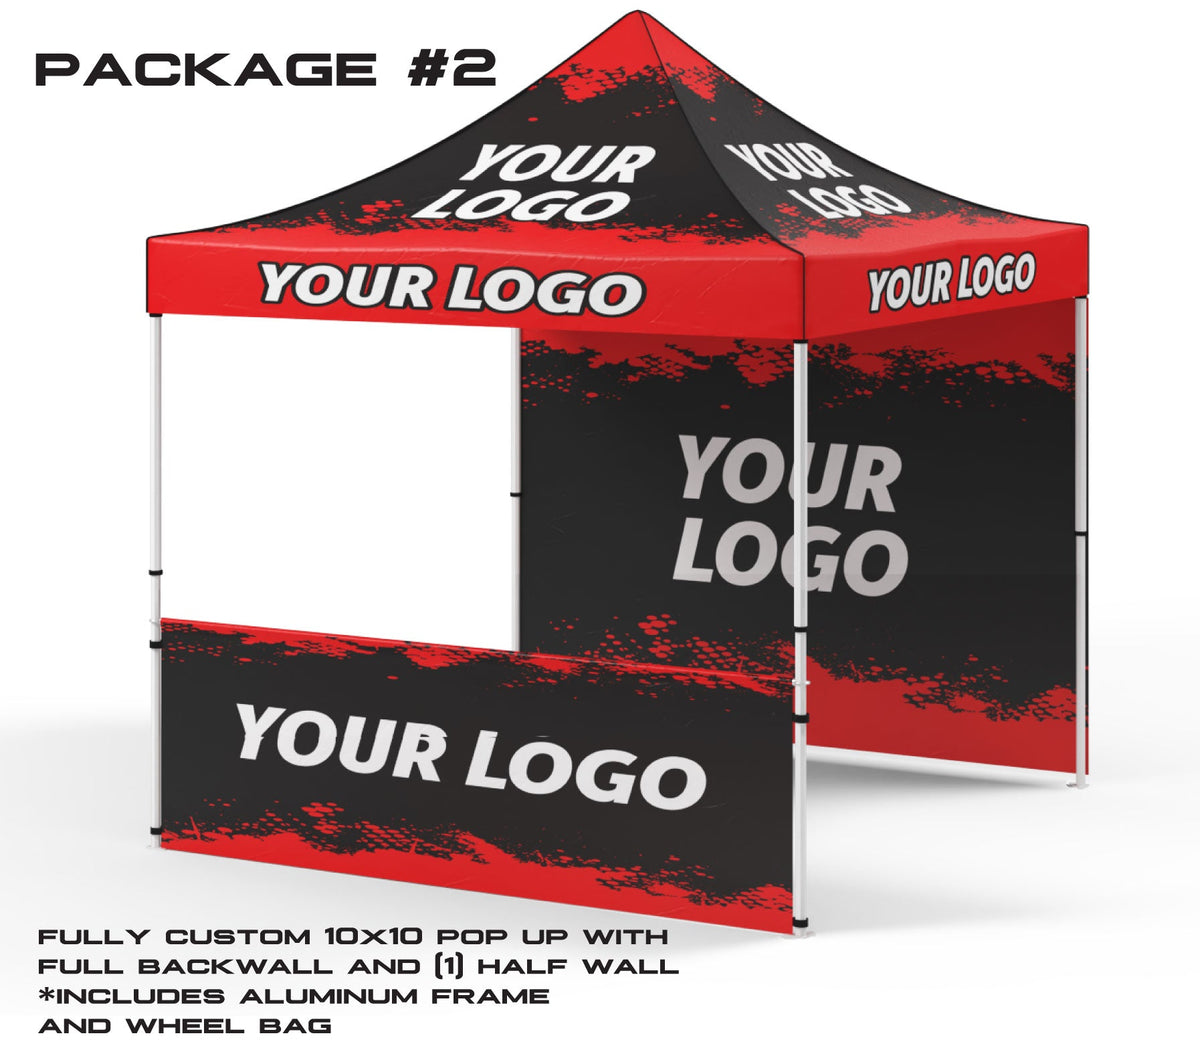 10x10 Package #2